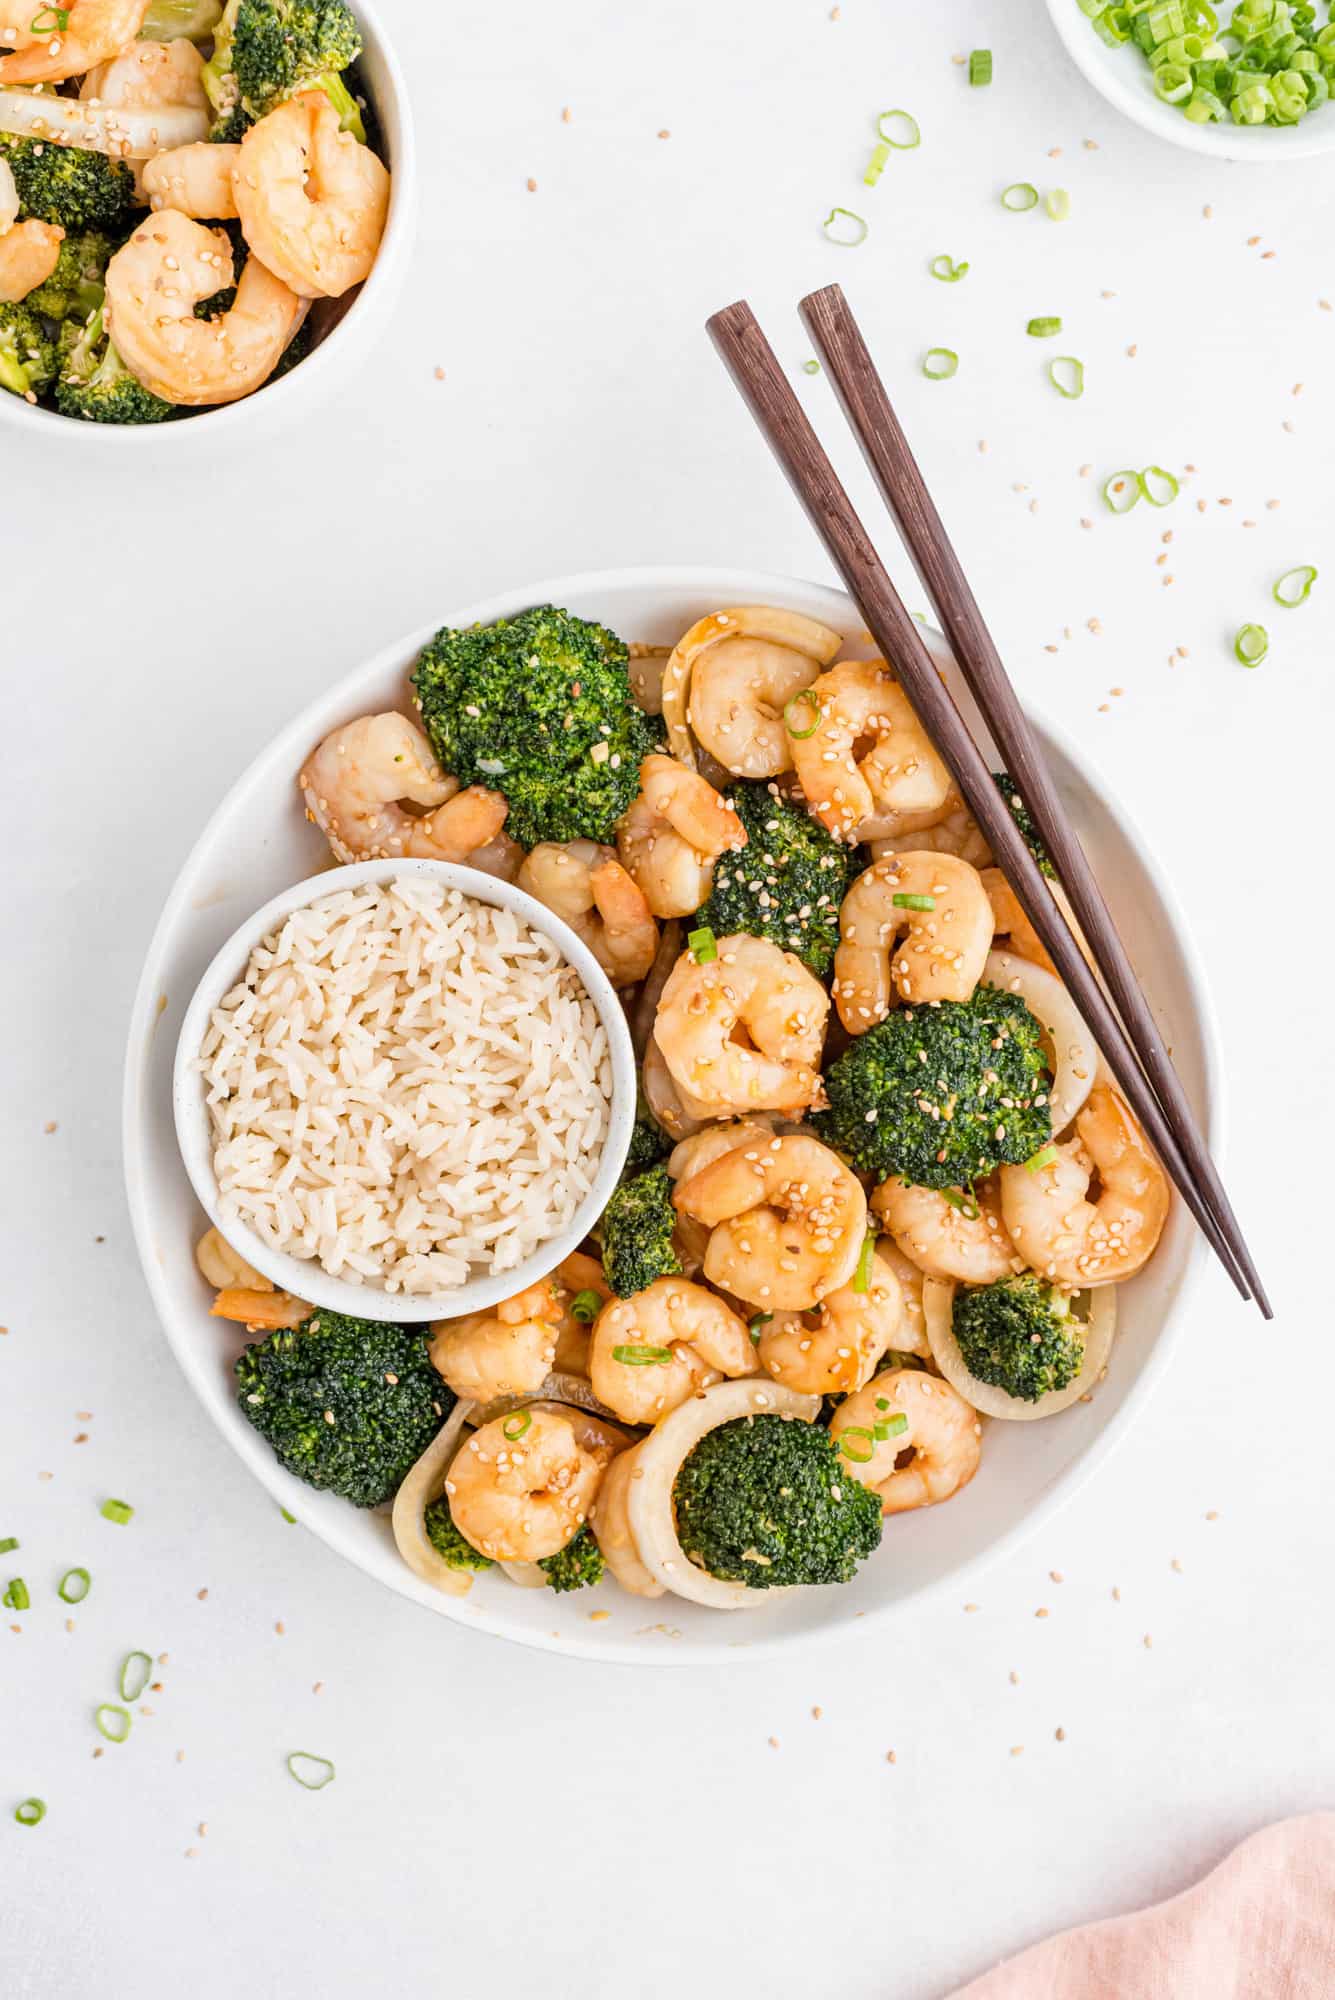 Broccoli and shrimp stir fry in a bowl with rice and chopsticks.